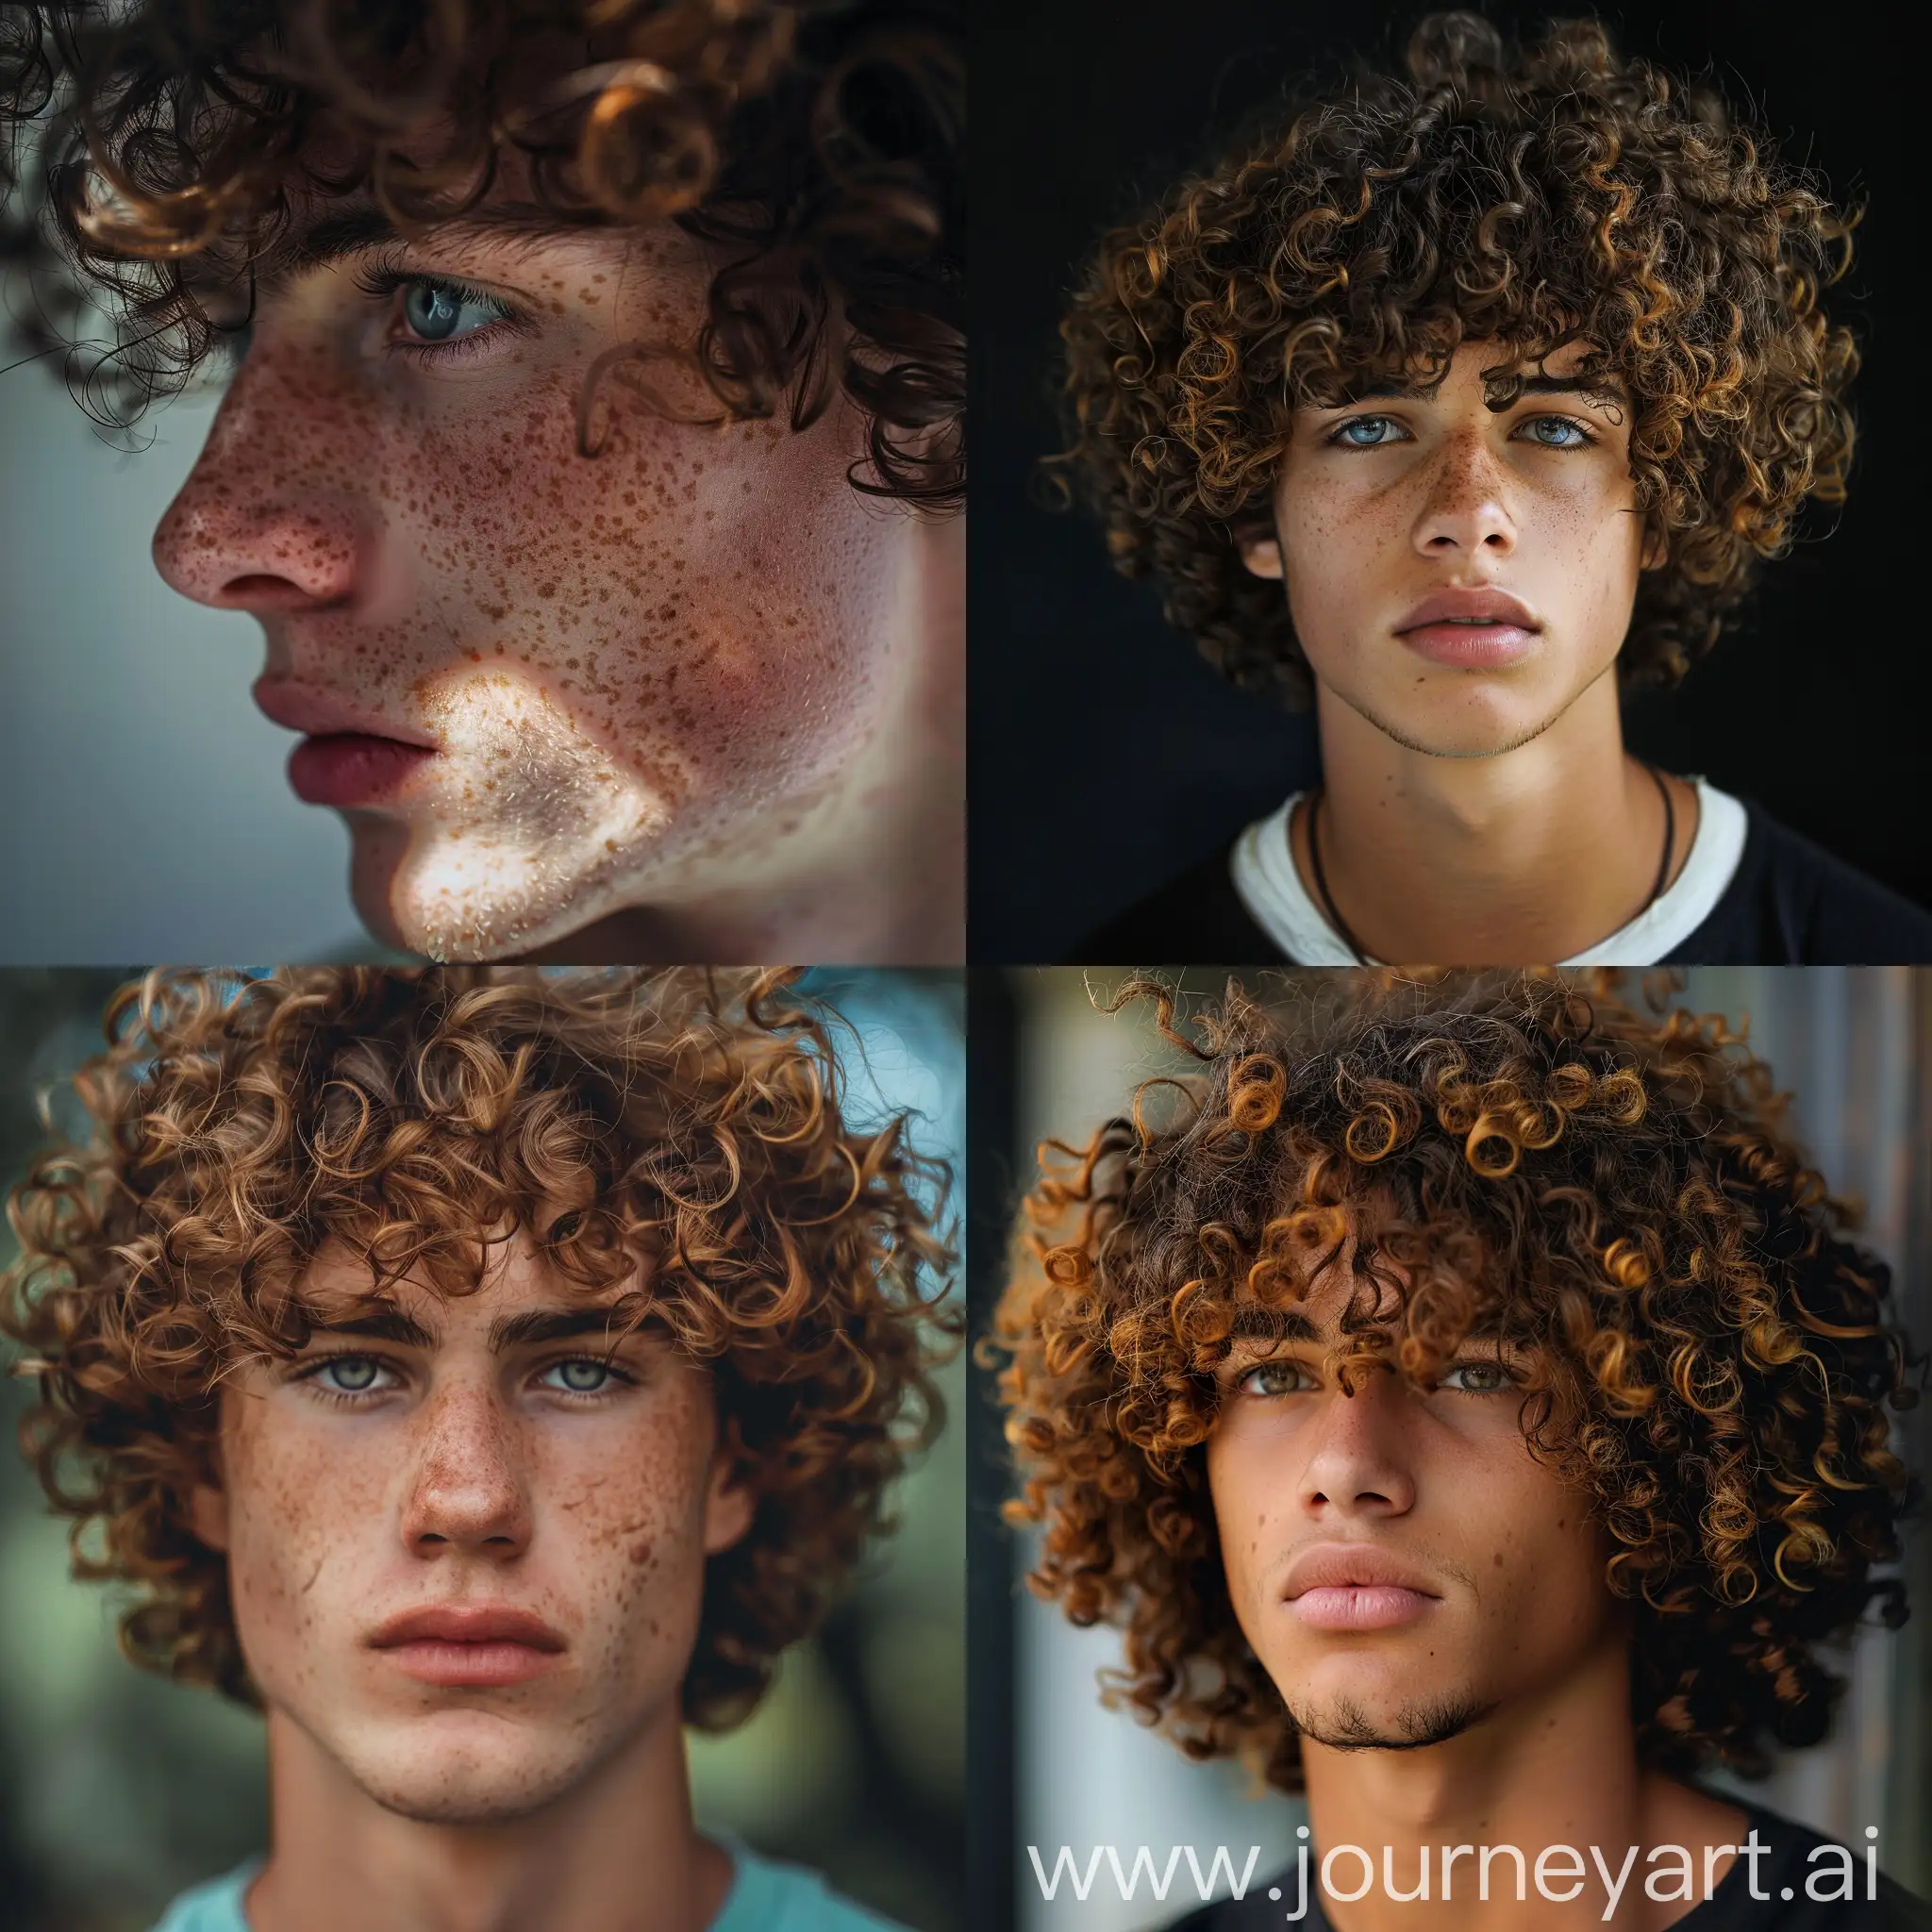 Young-Man-with-Curly-Hair-in-1920x1080-Format